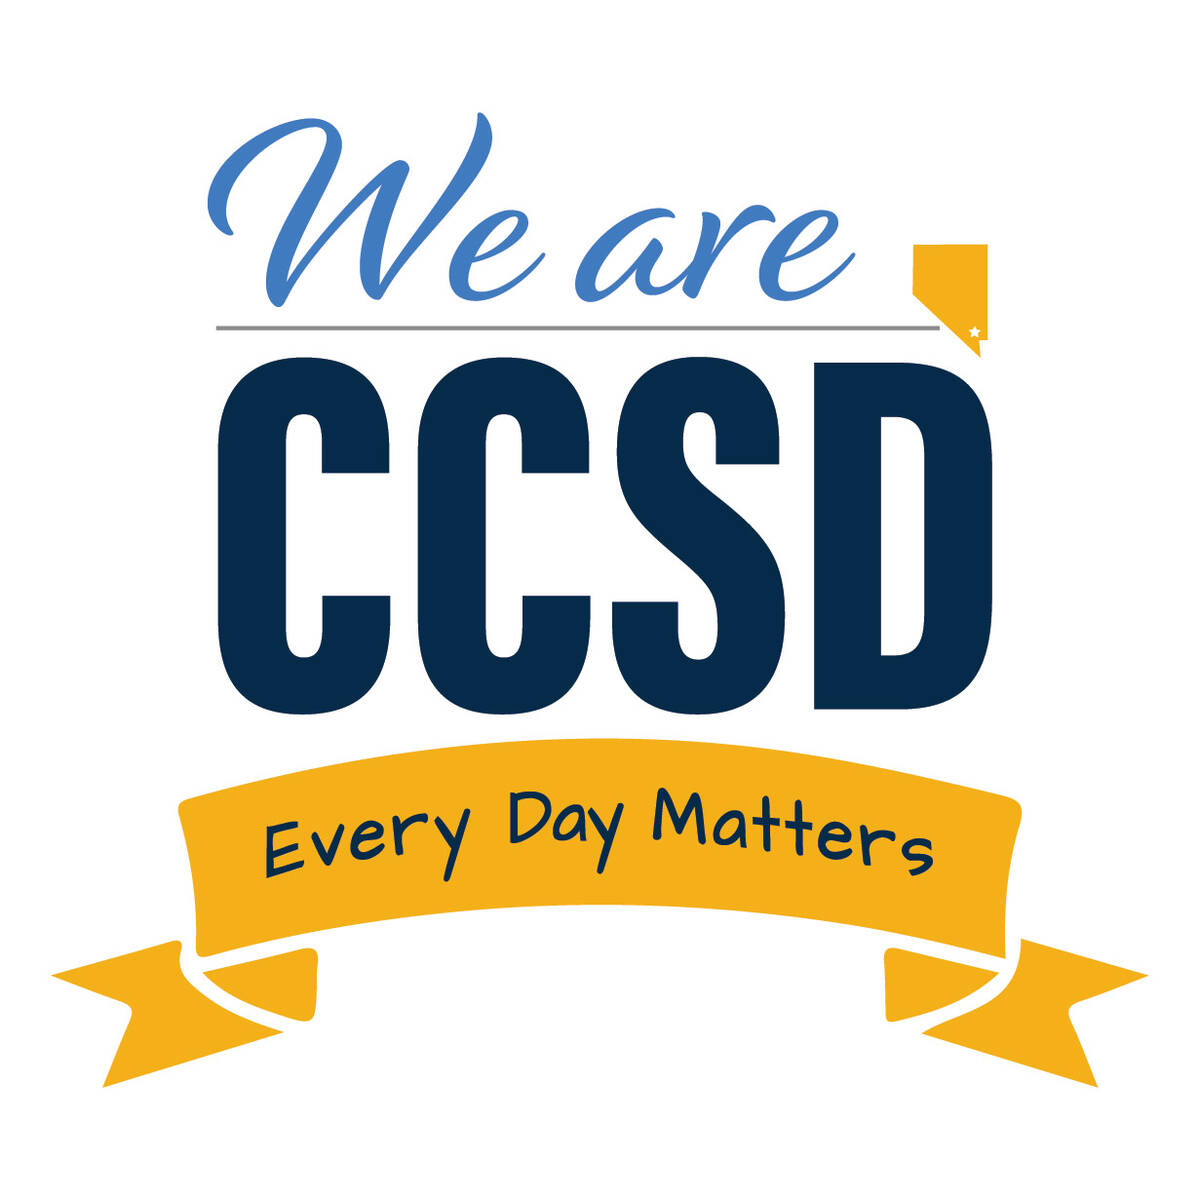 Clark County School District's Every Day Matters logo. (Clark County School District)